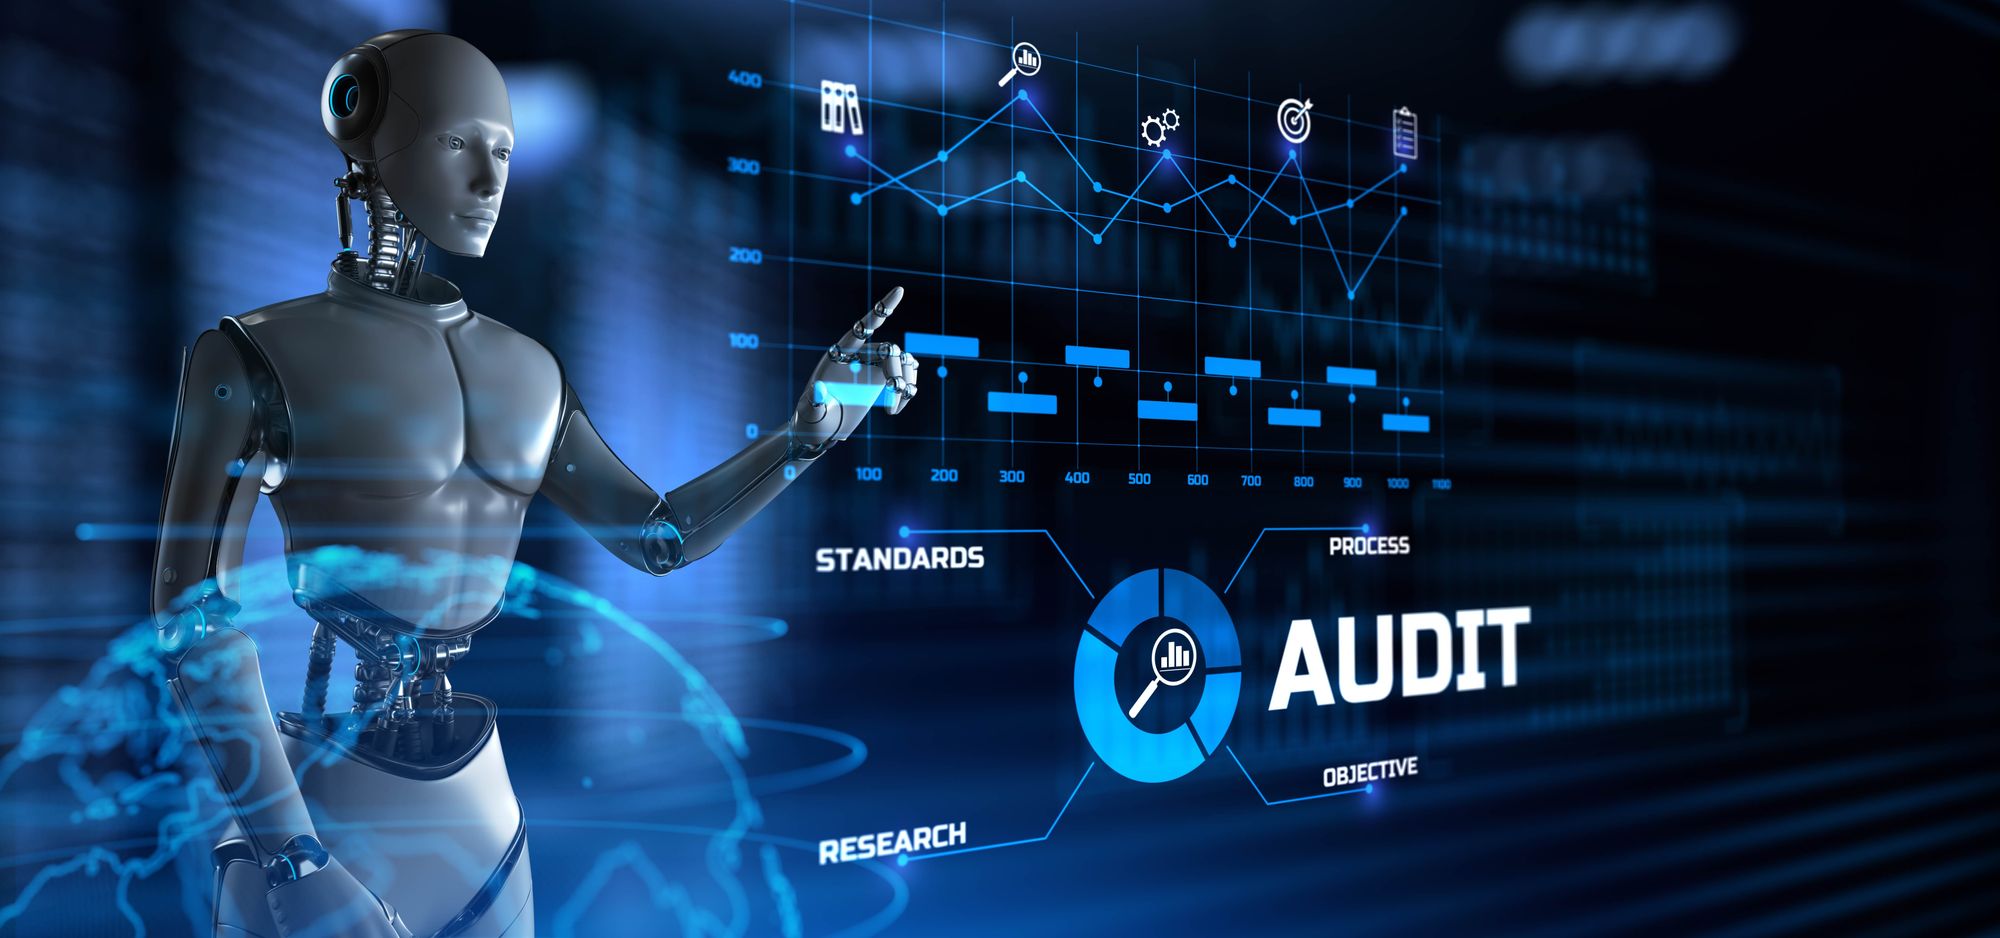 The future of RPA in Audit